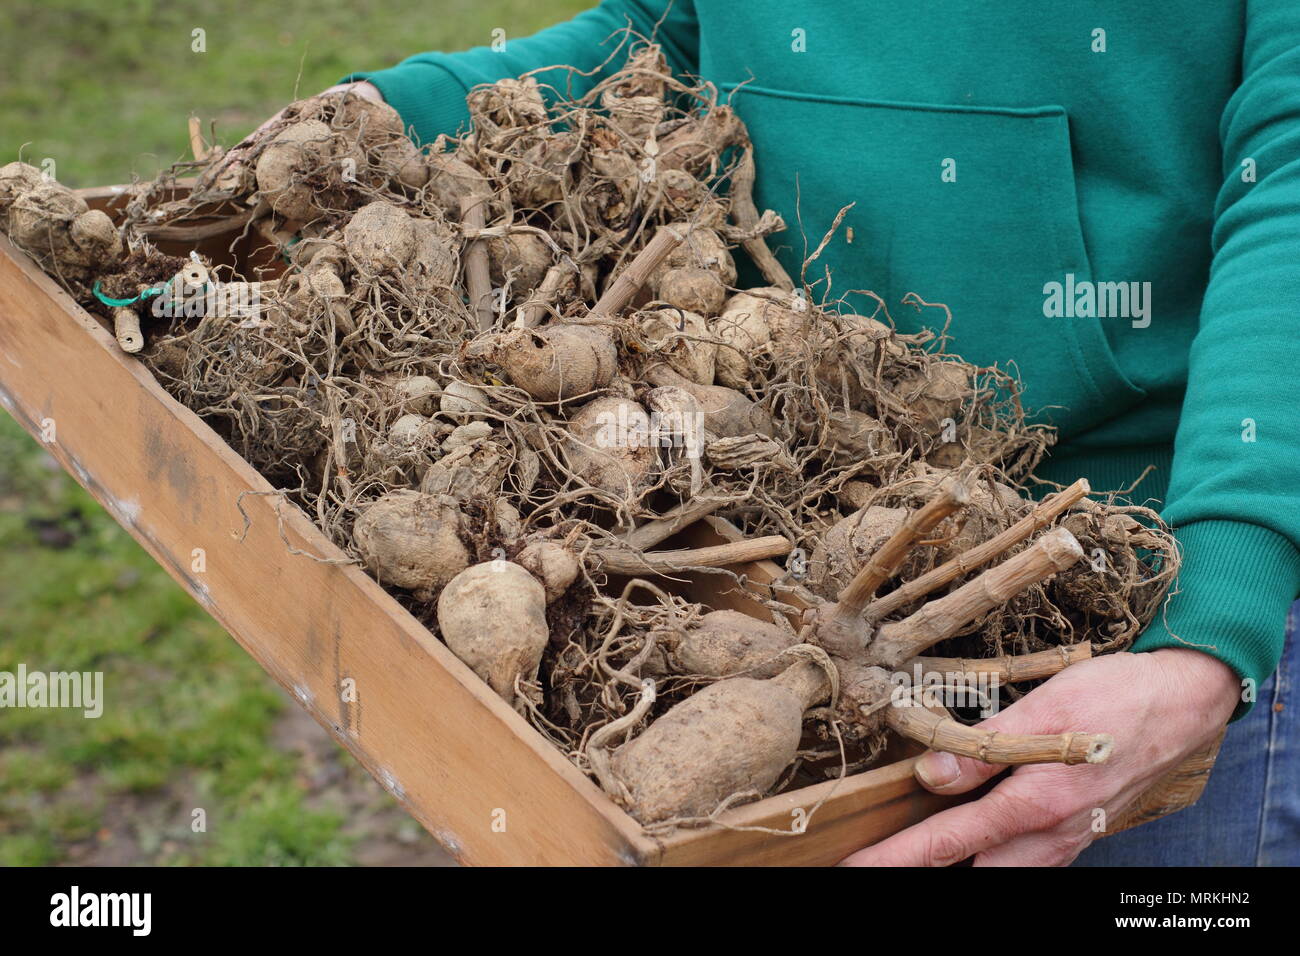 Wooden tray containing over wintered dahlia tubers ready for potting up, spring, UK Stock Photo